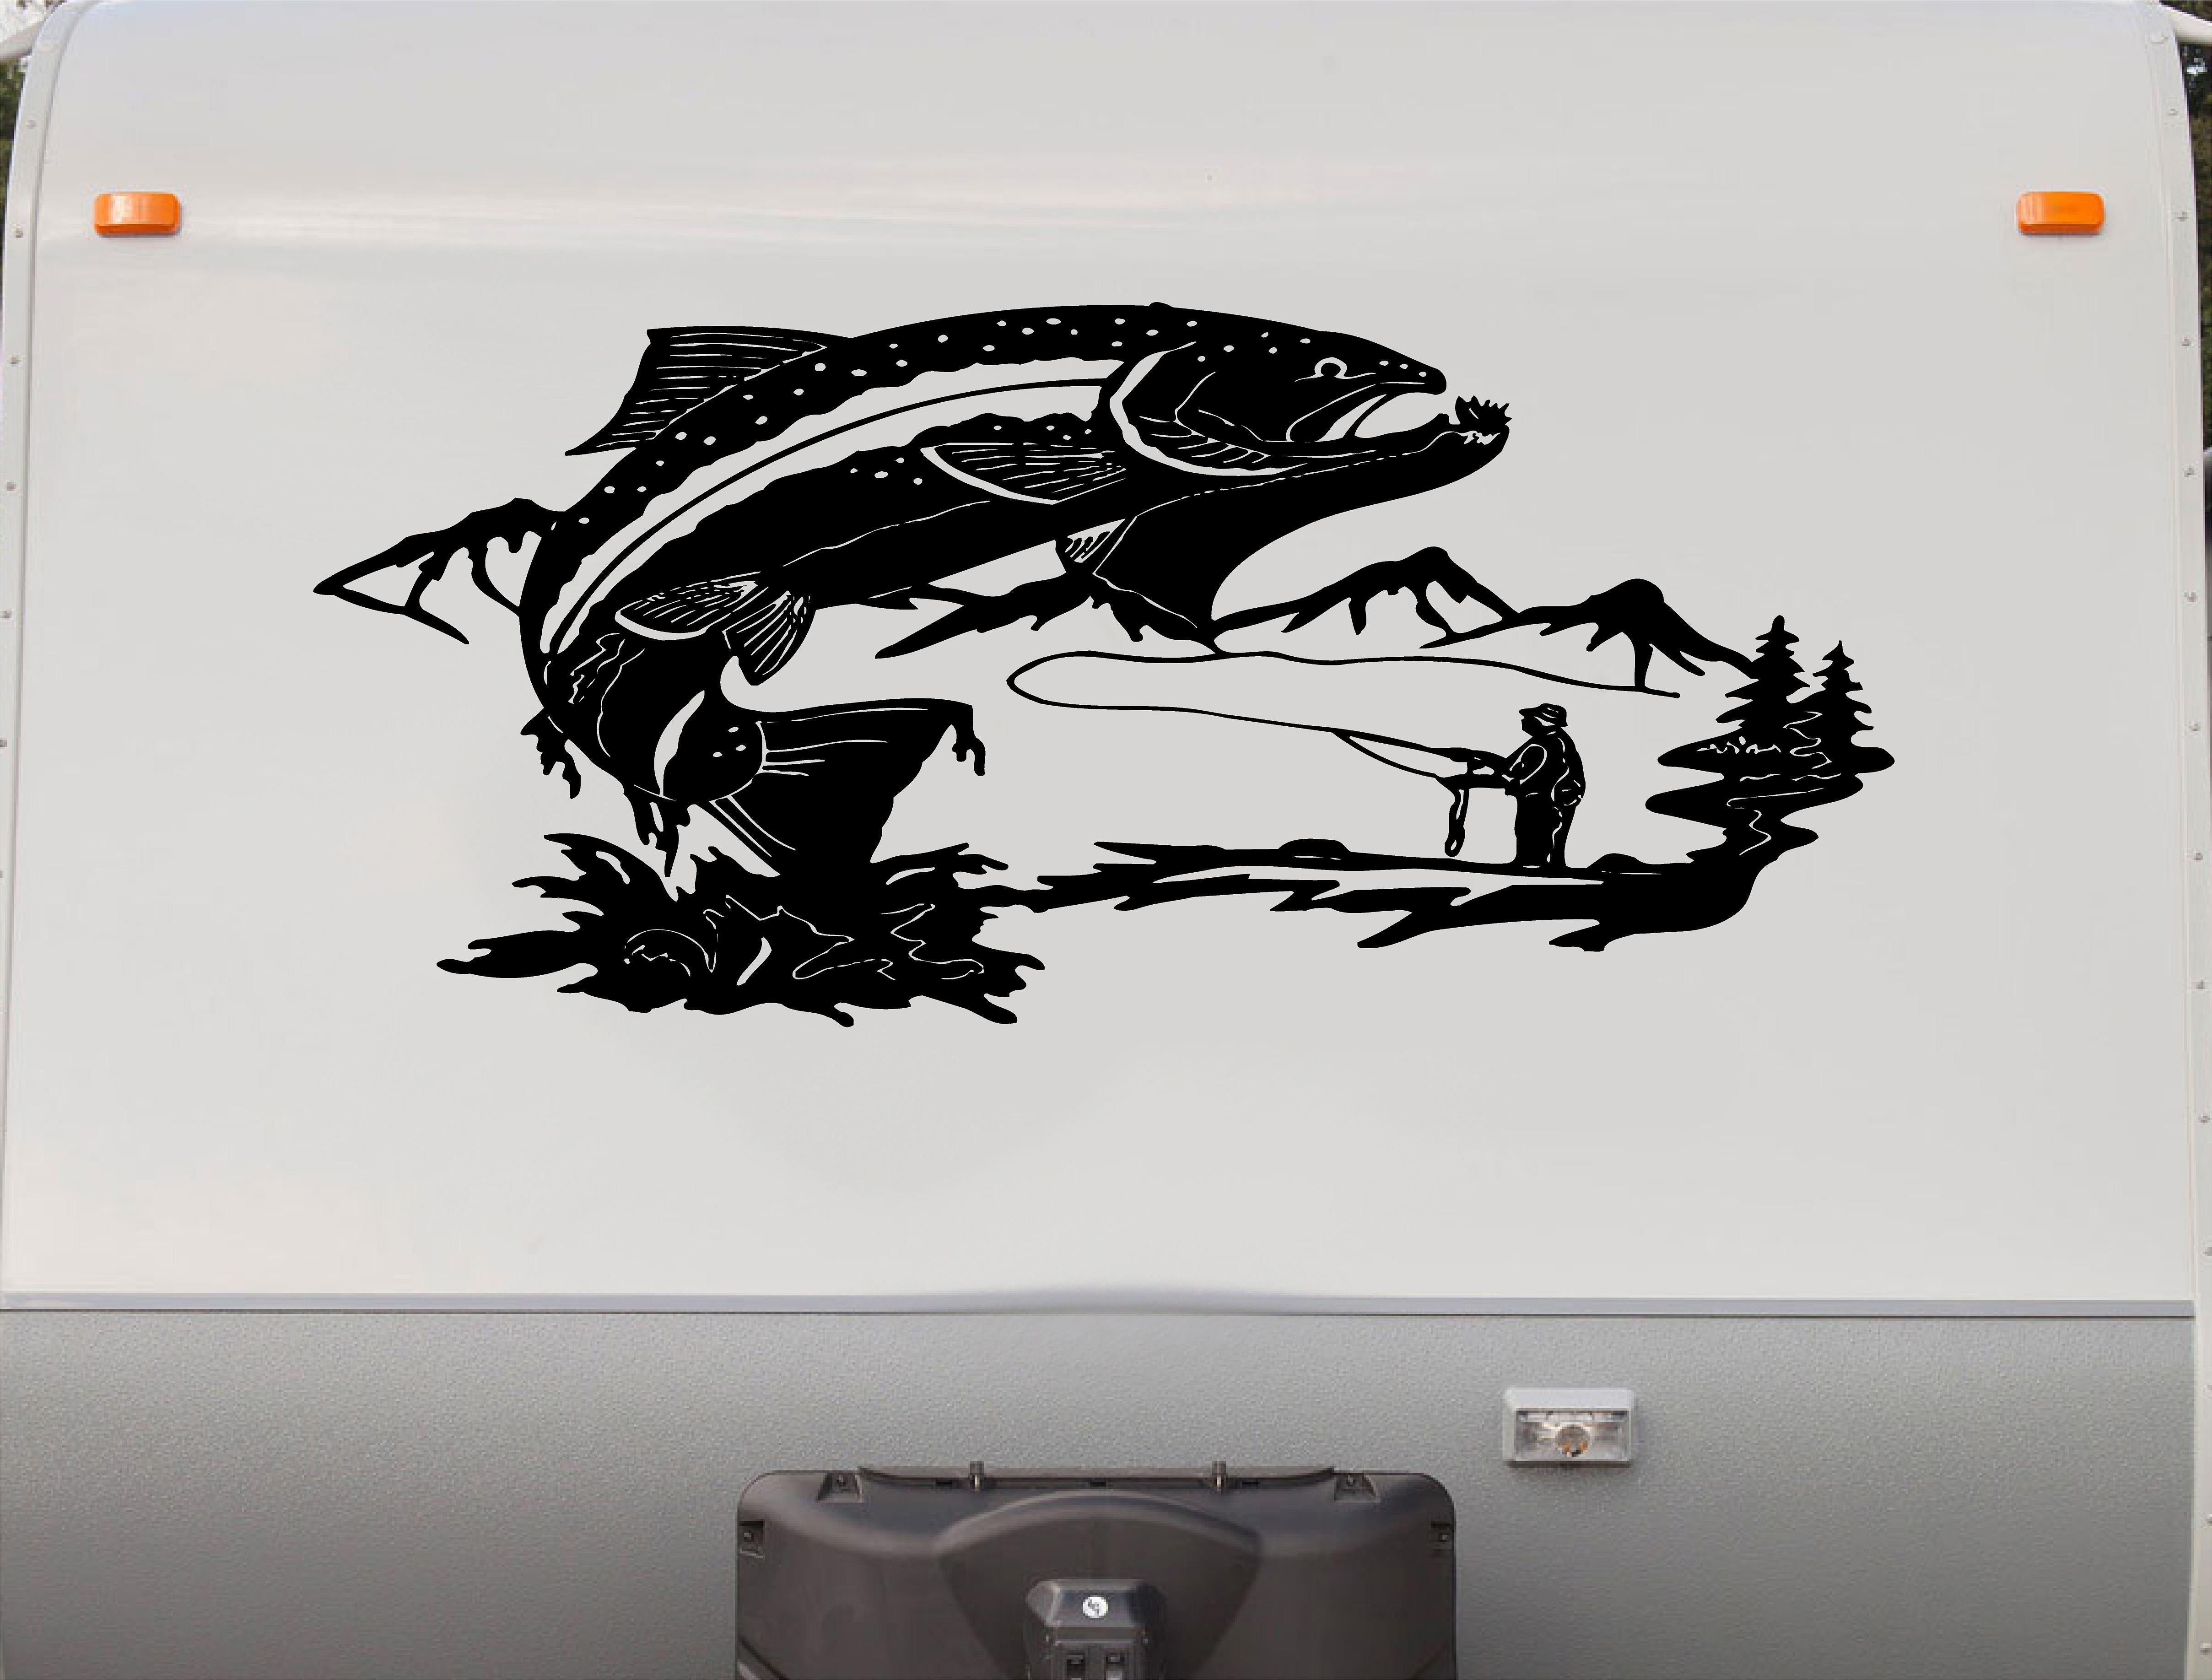 How-To Install Custom Decals On A Fishing Rod